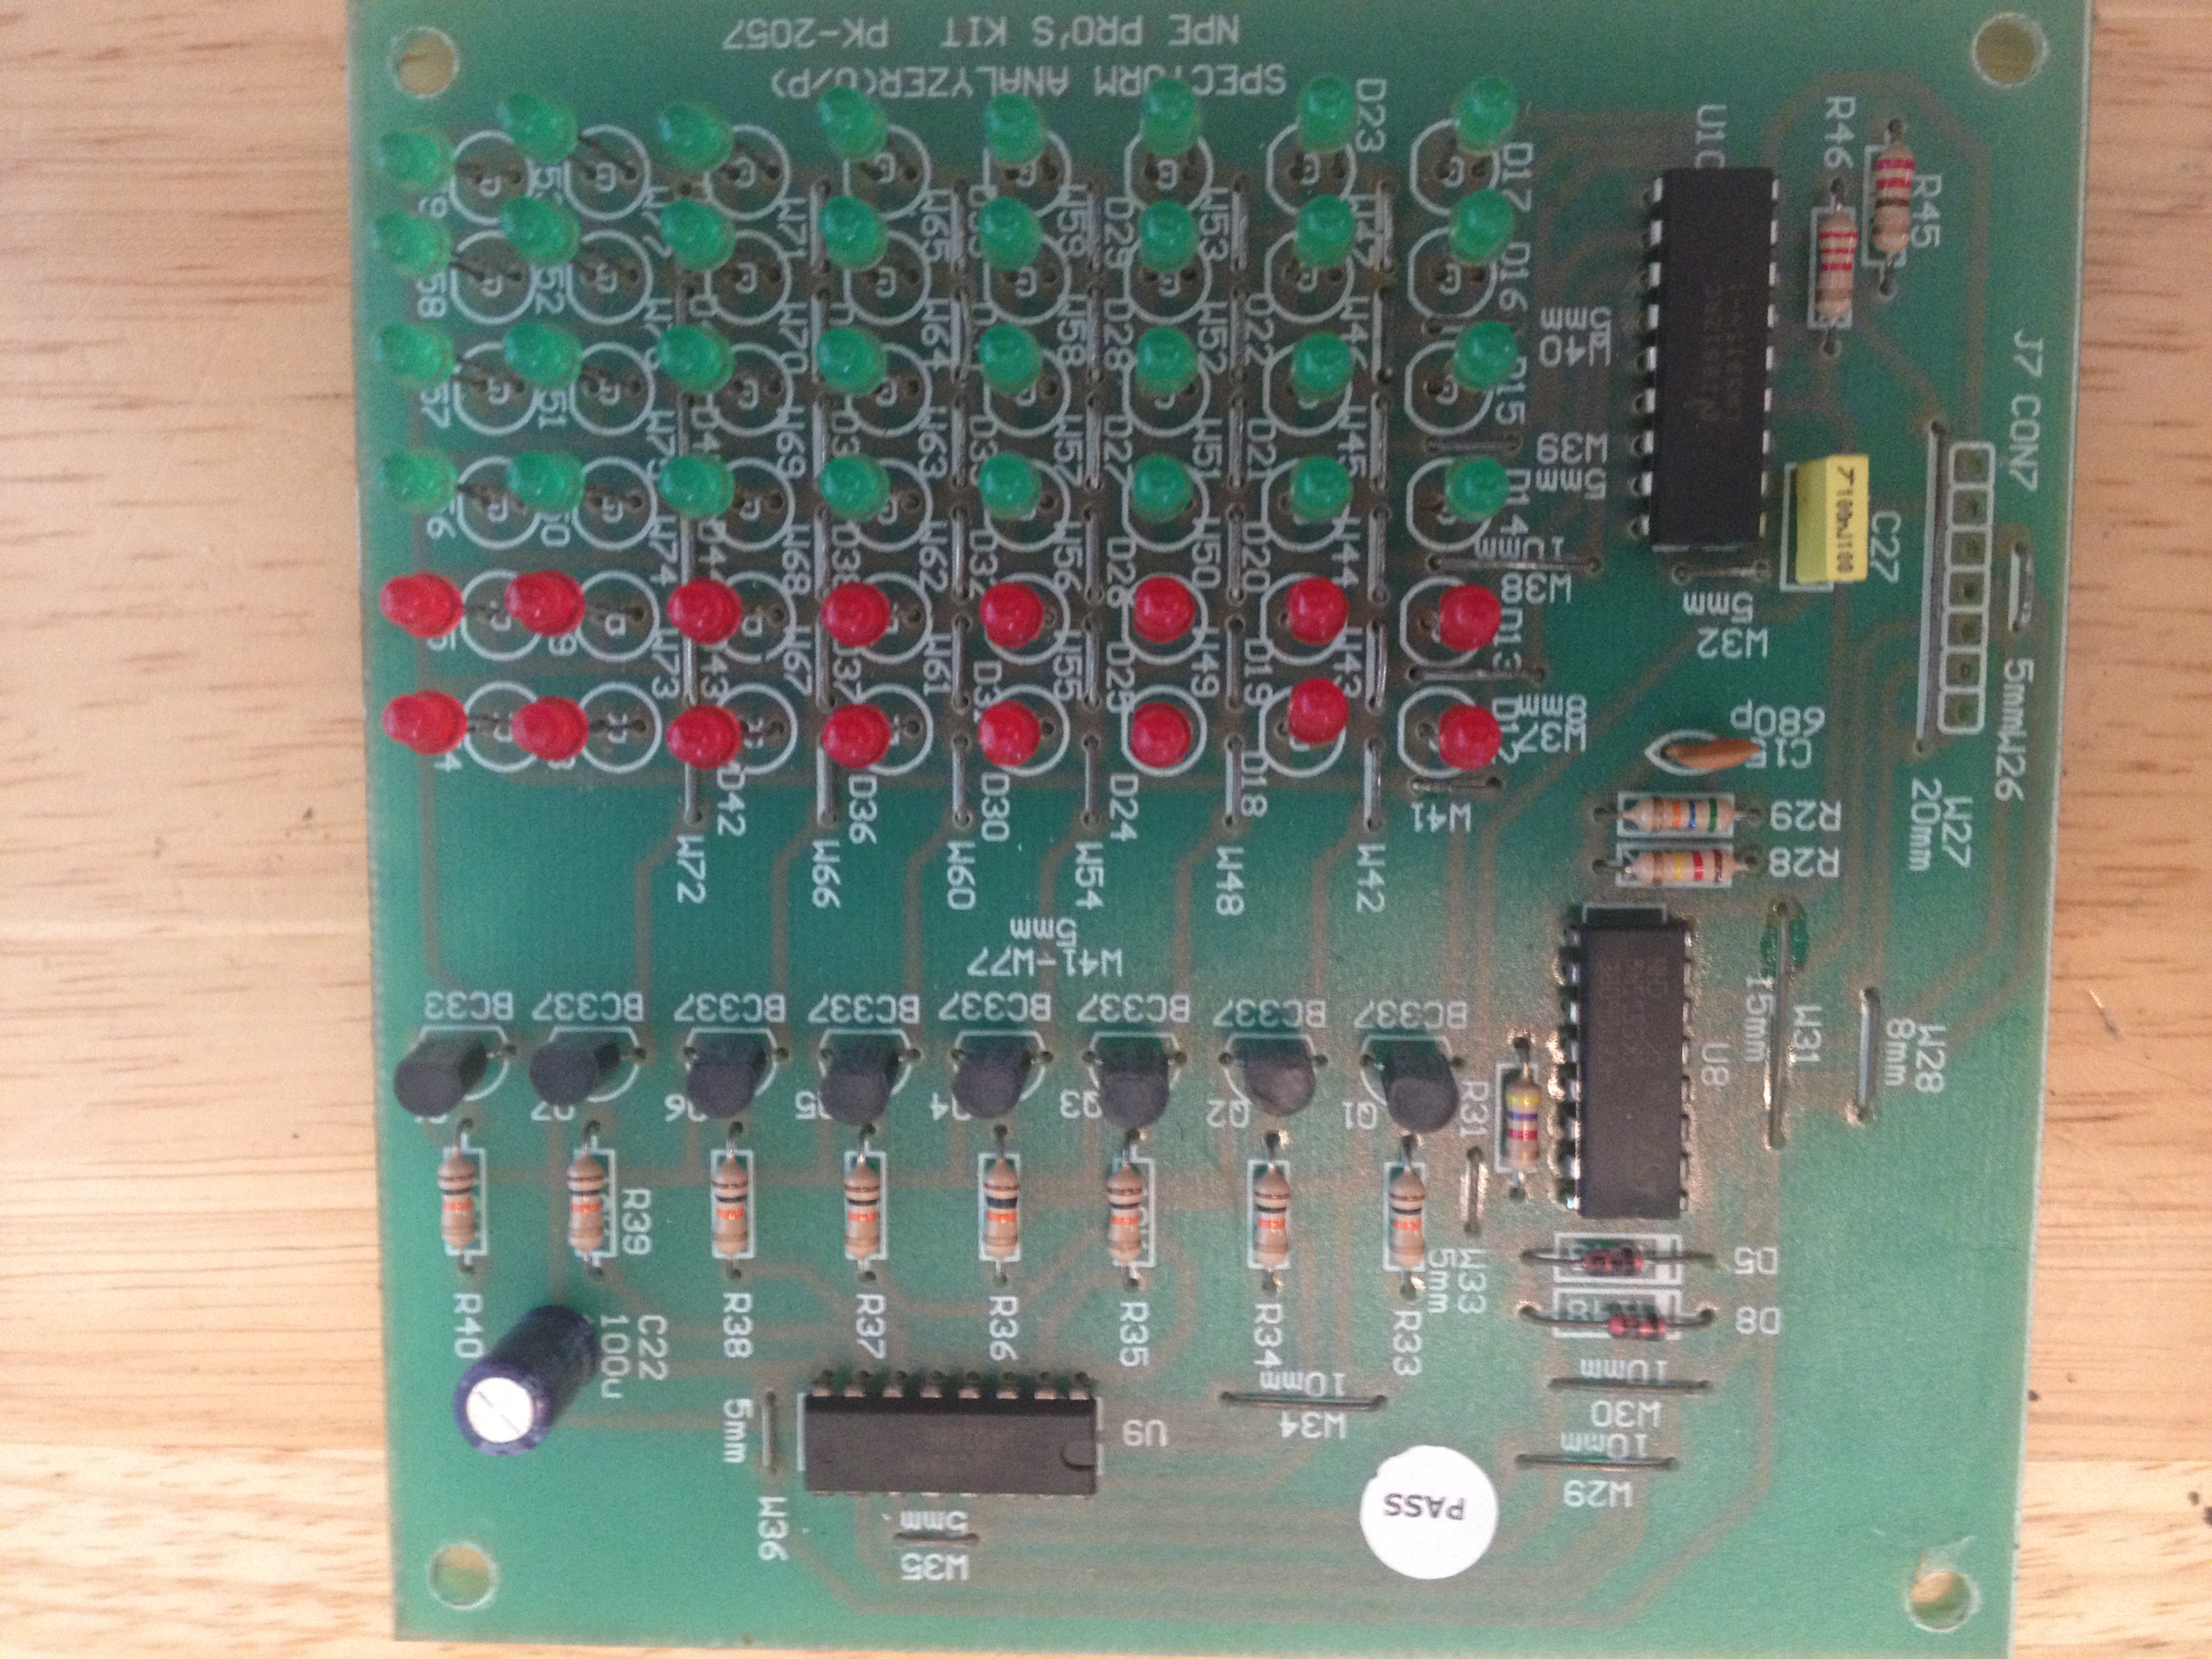 Schematic sucks – so here are the photos of the board